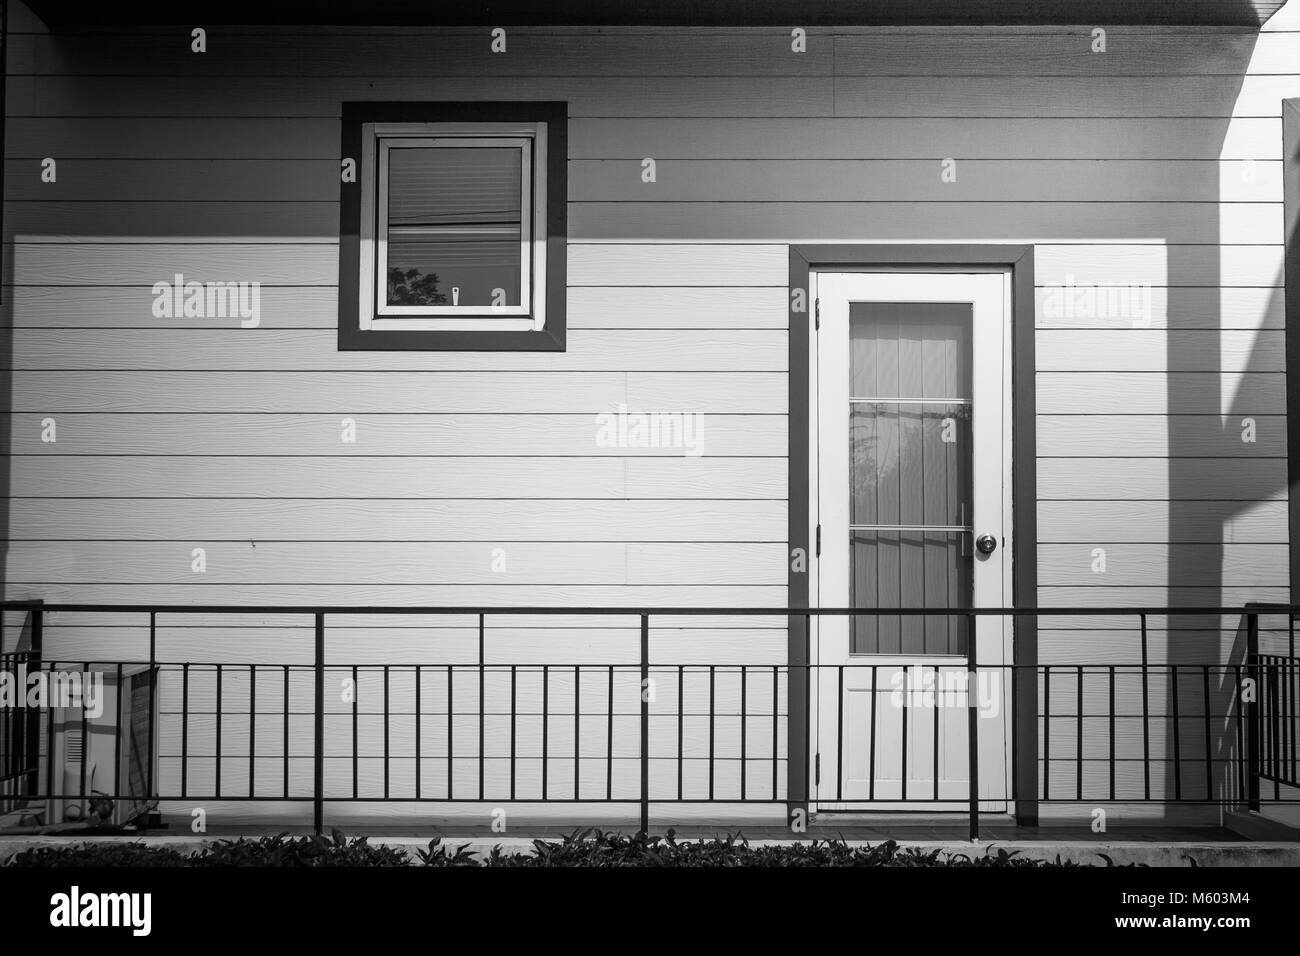 Abstract black and white image of architecture building interior design of wooden window and door of apartment. Stock Photo